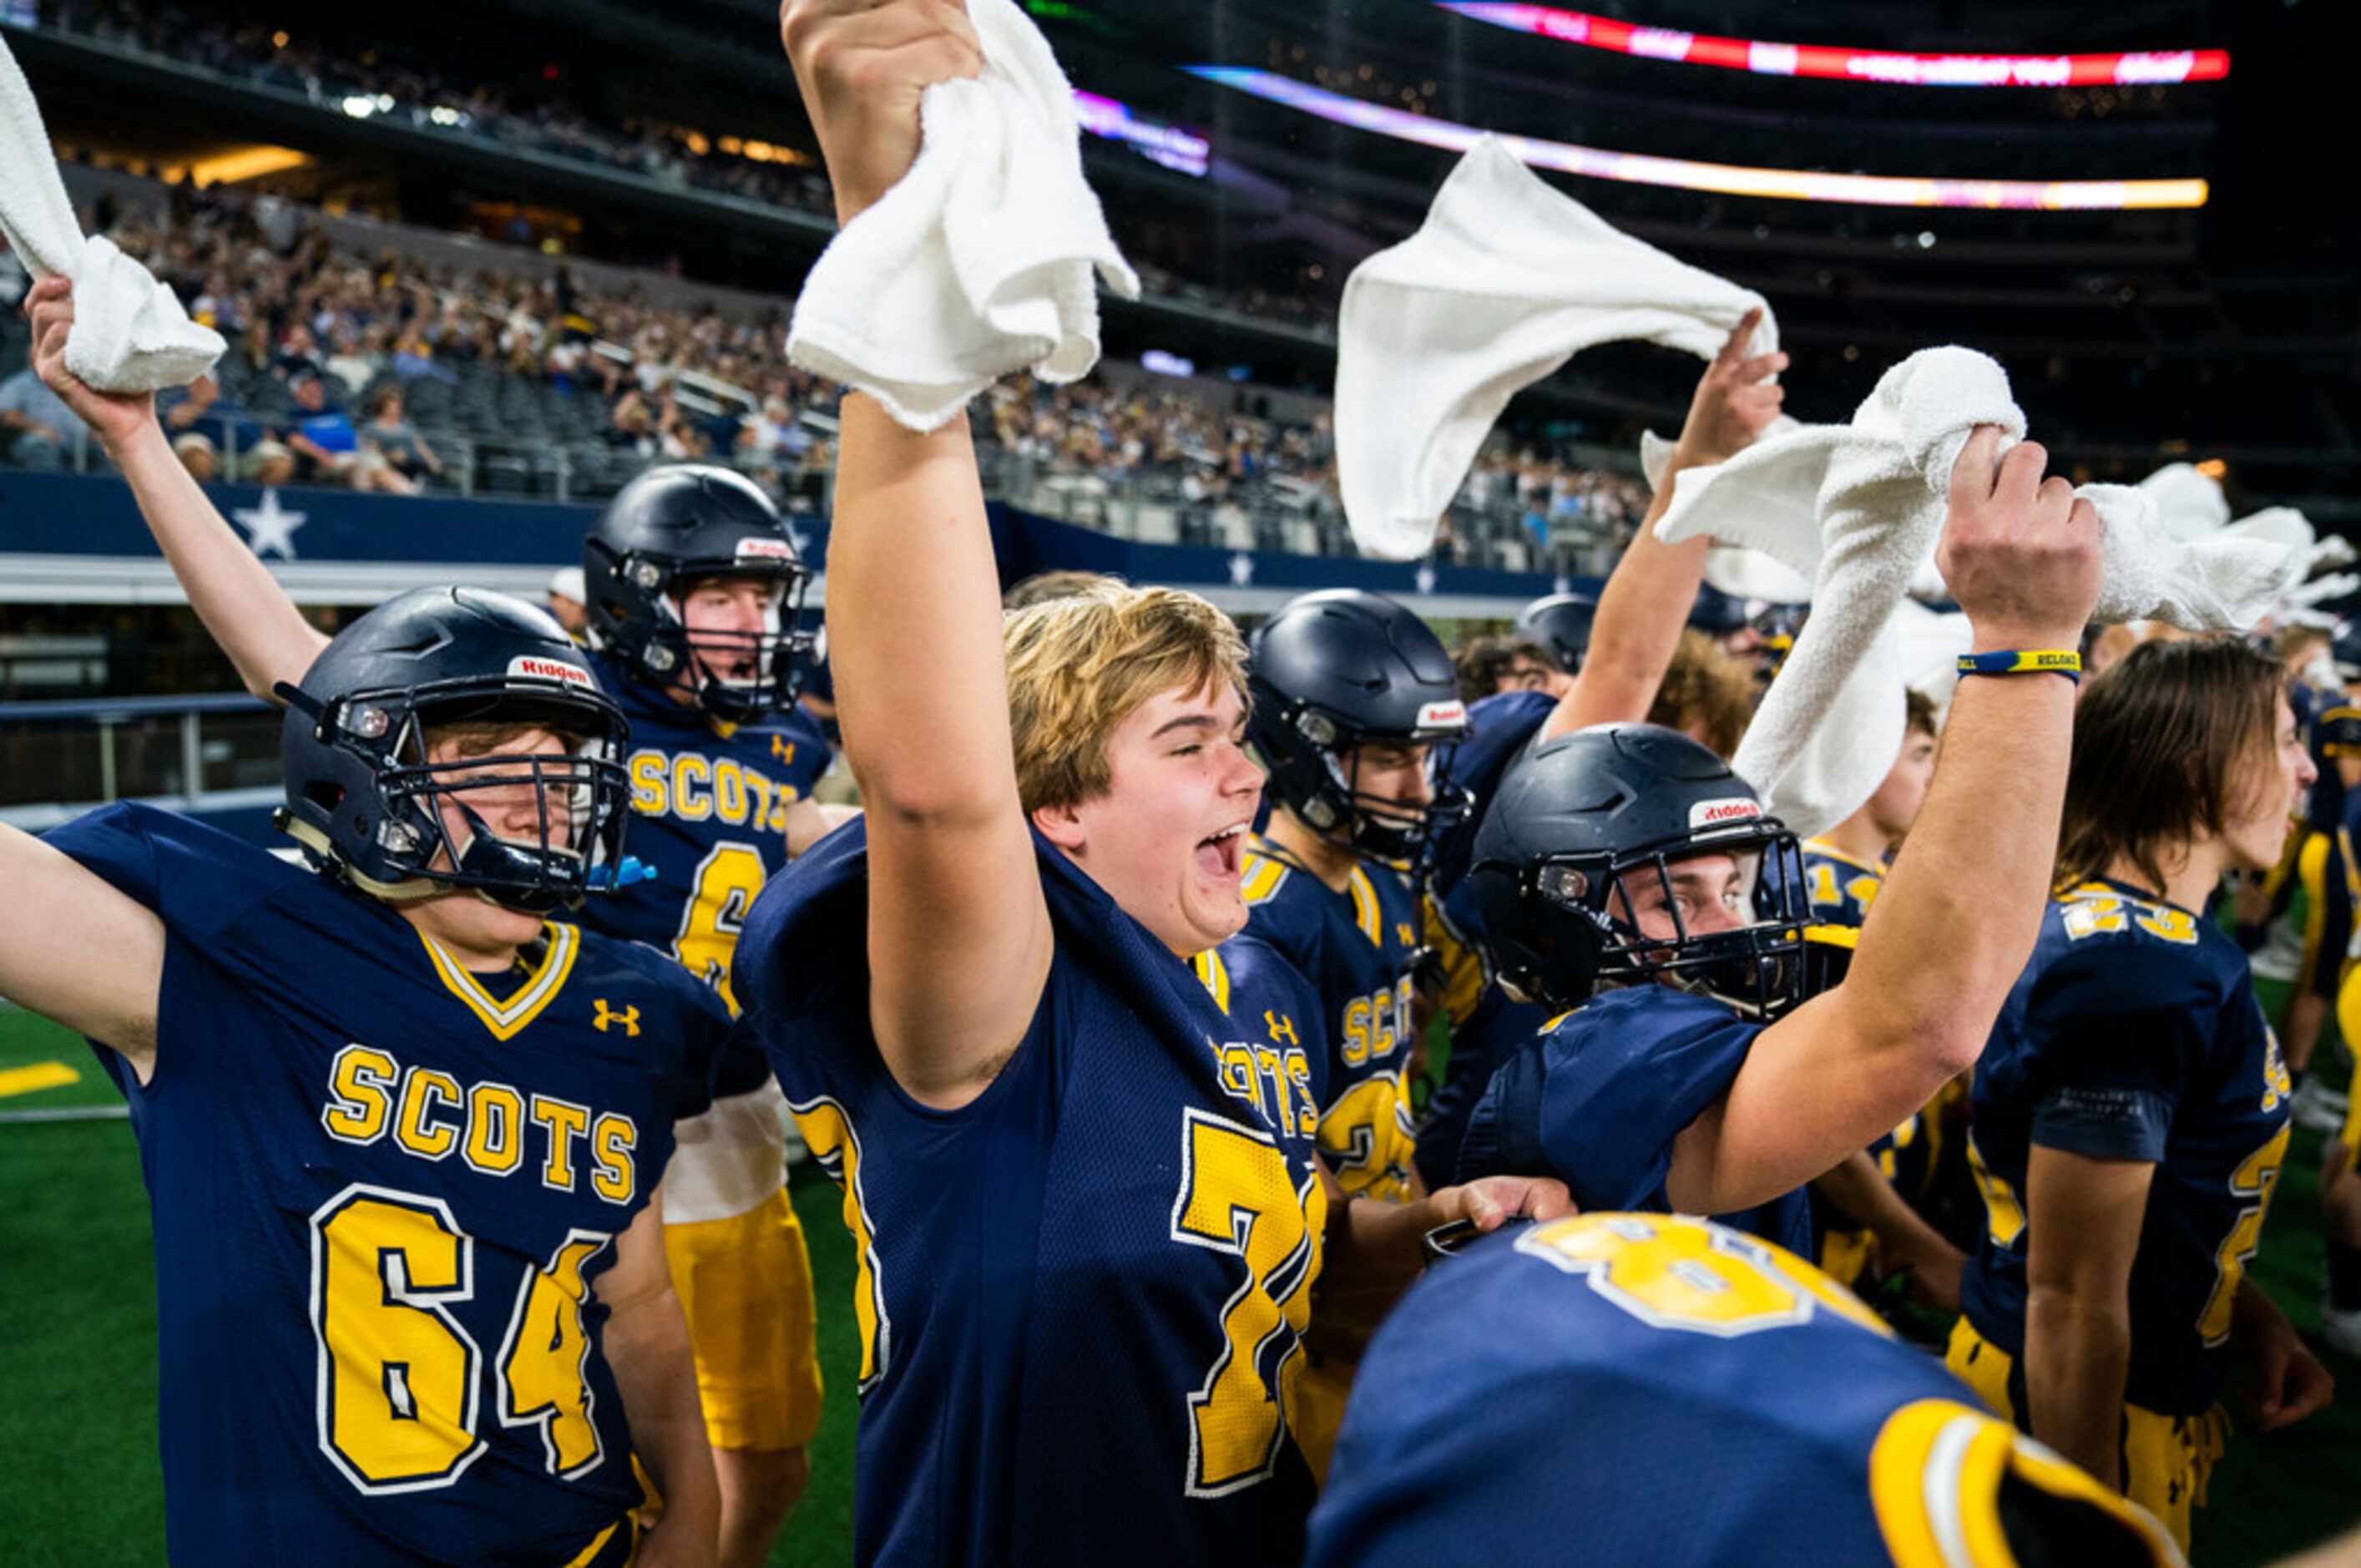 Highland Park football players cheer at a Magnolia third down play during the first quarter...